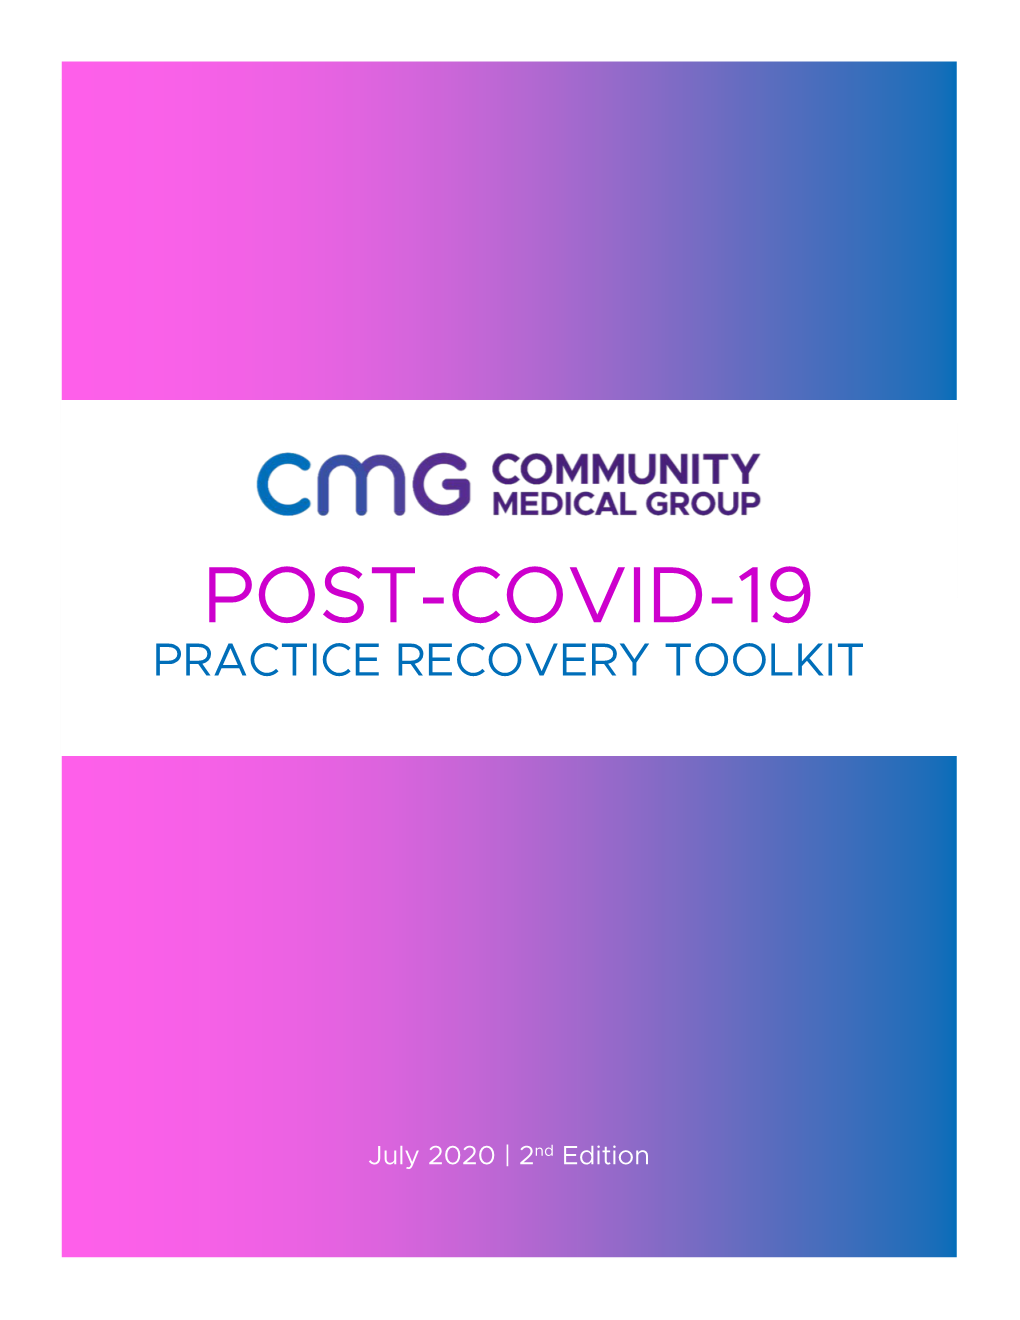 Post-Covid-19 Practice Recovery Toolkit